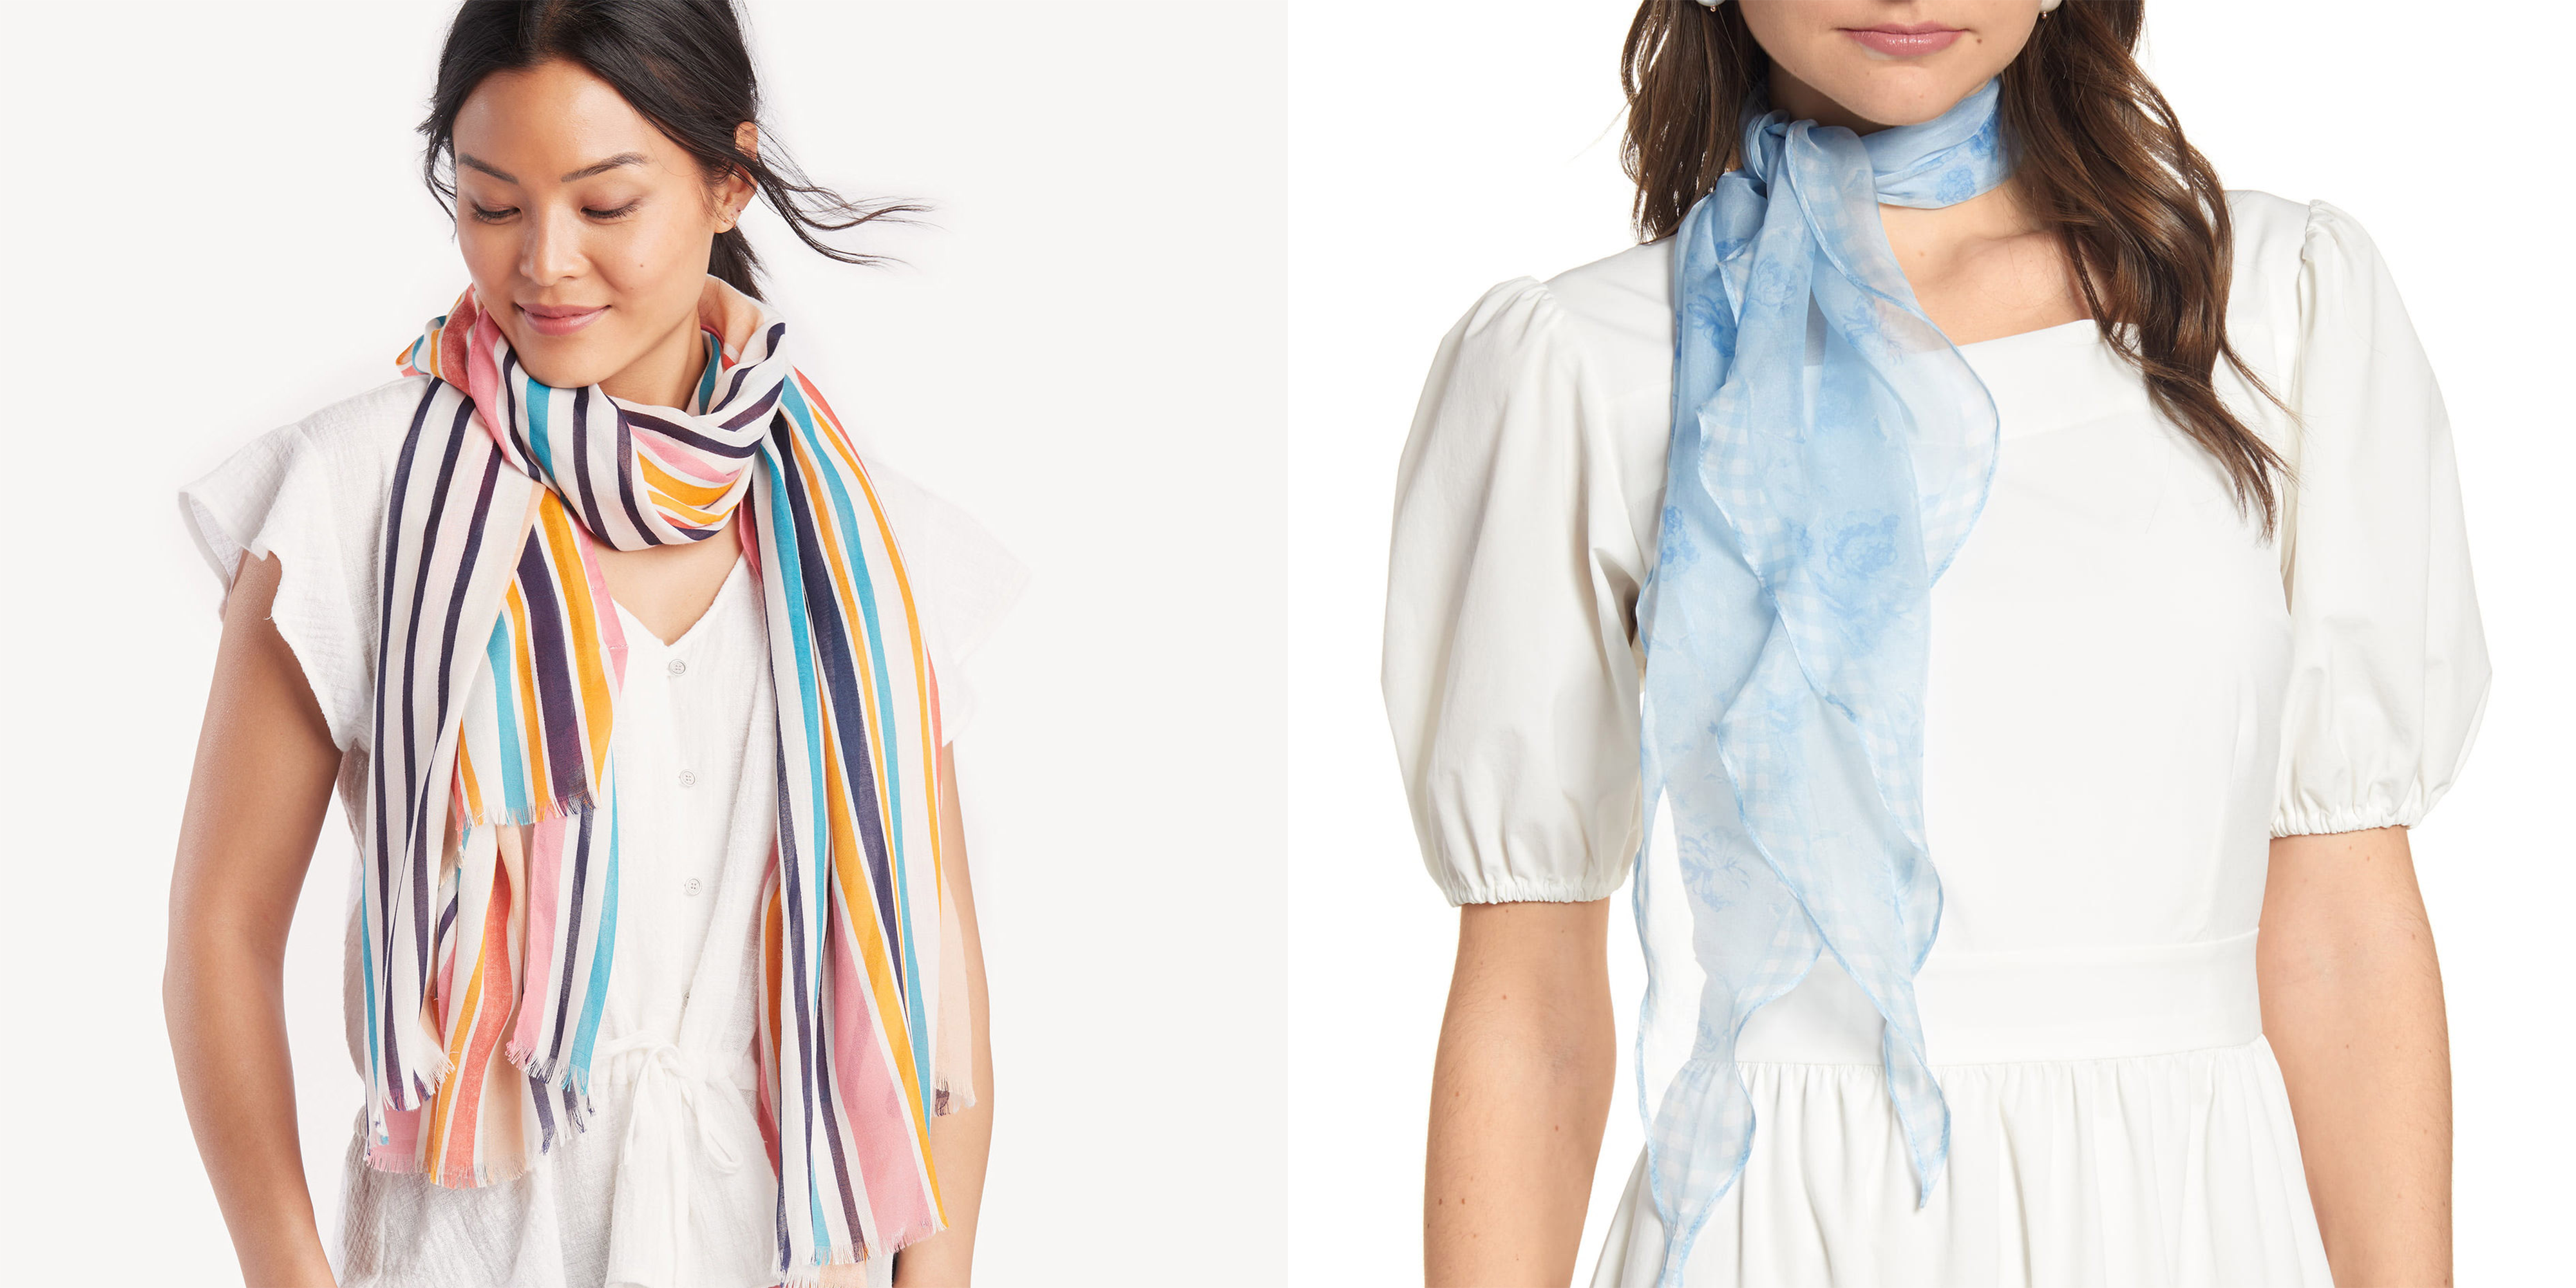 Summer is over – welcome back to big scarf season, Fashion